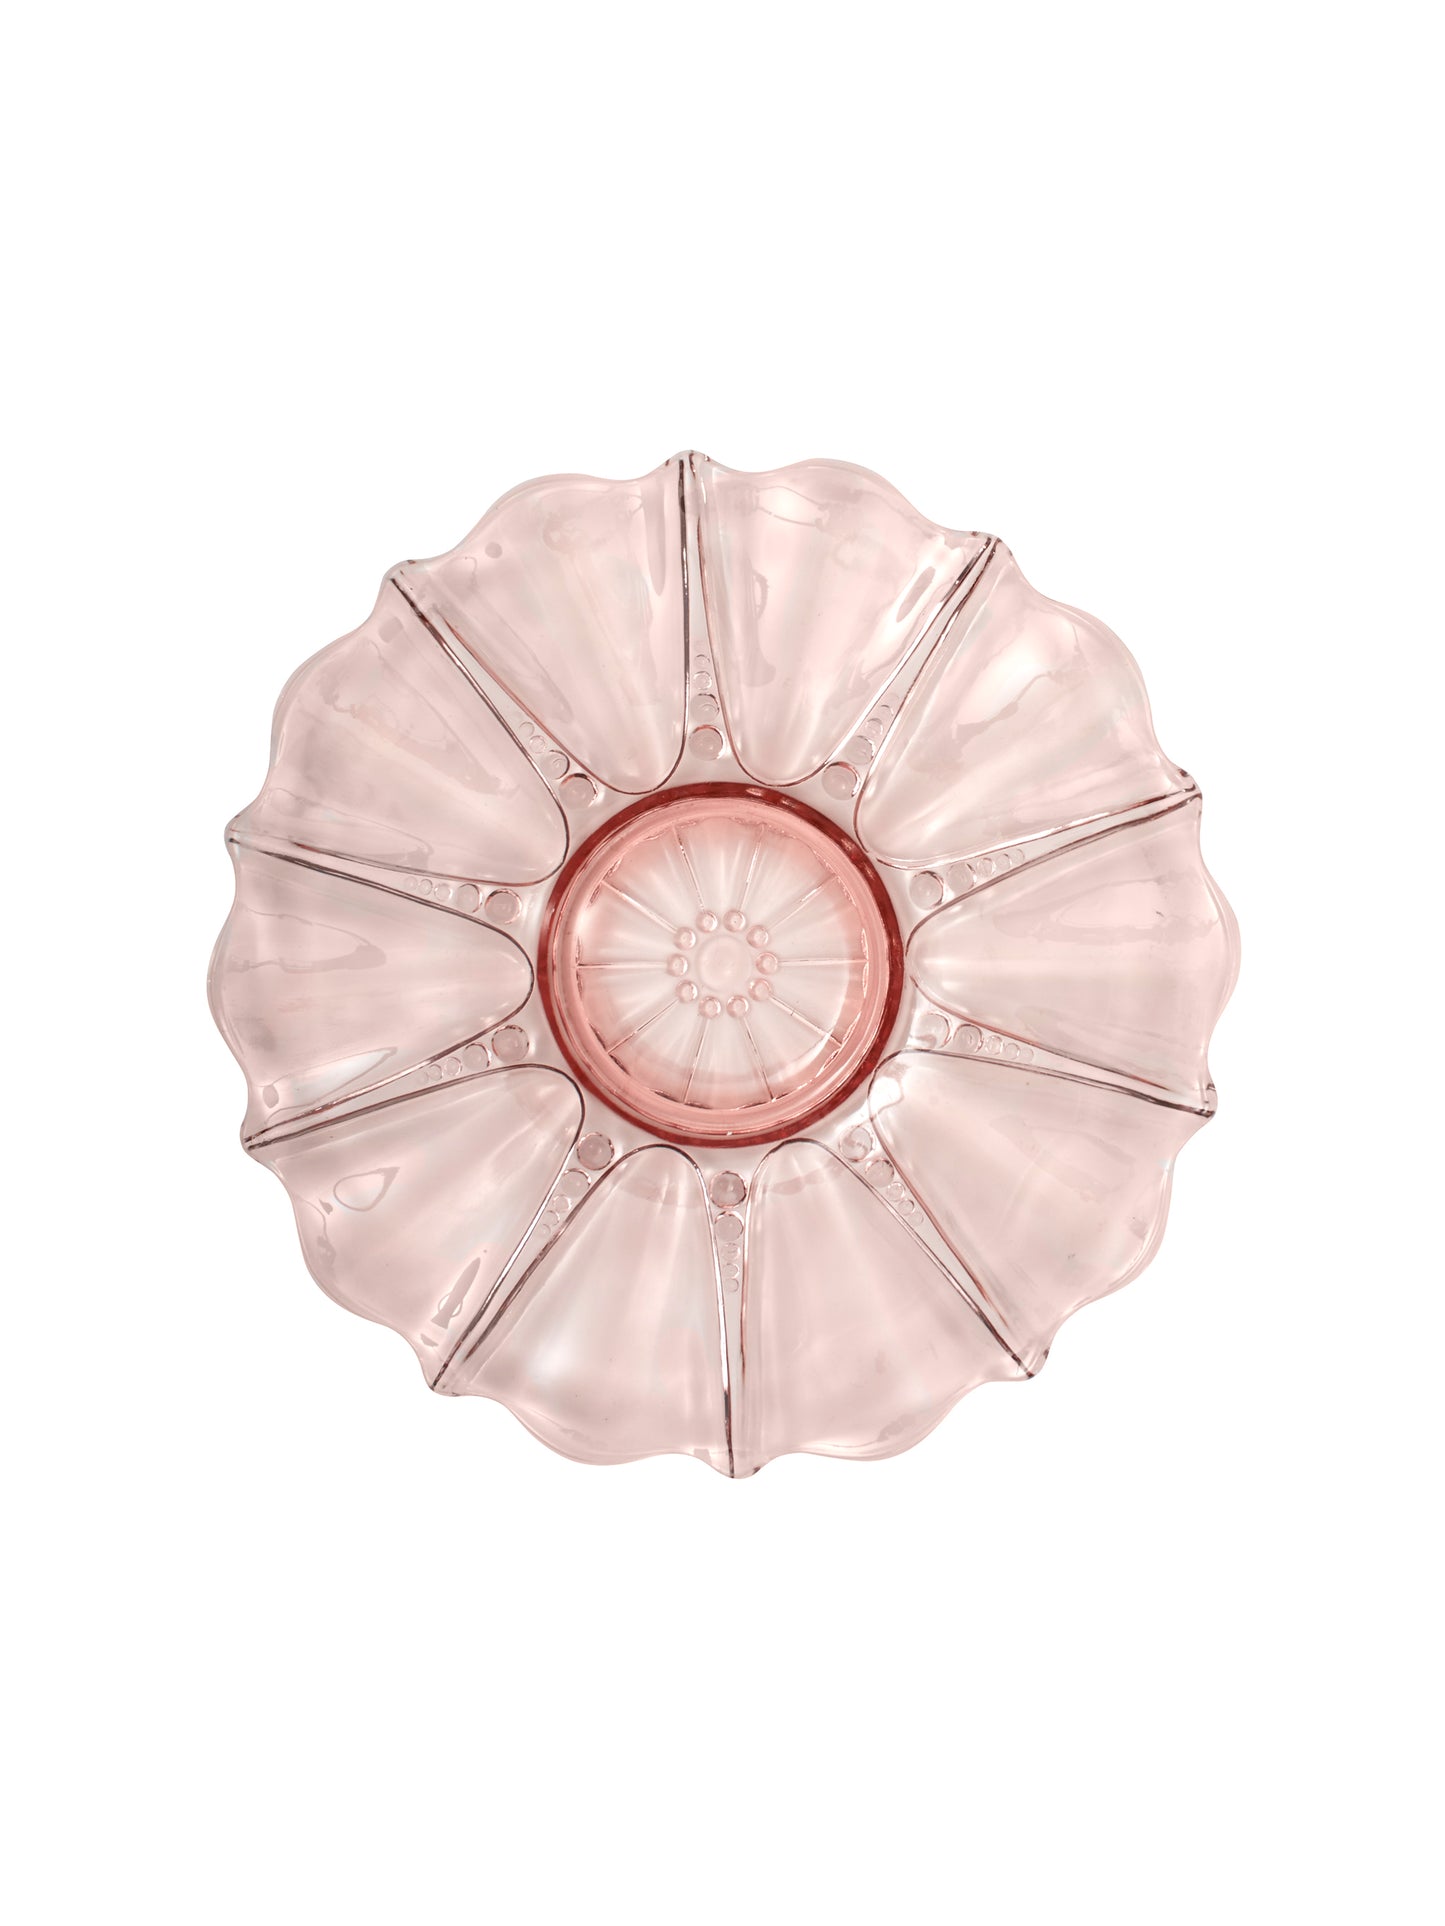 Vintage 1930s Pink Glass Oyster Platter Weston Table